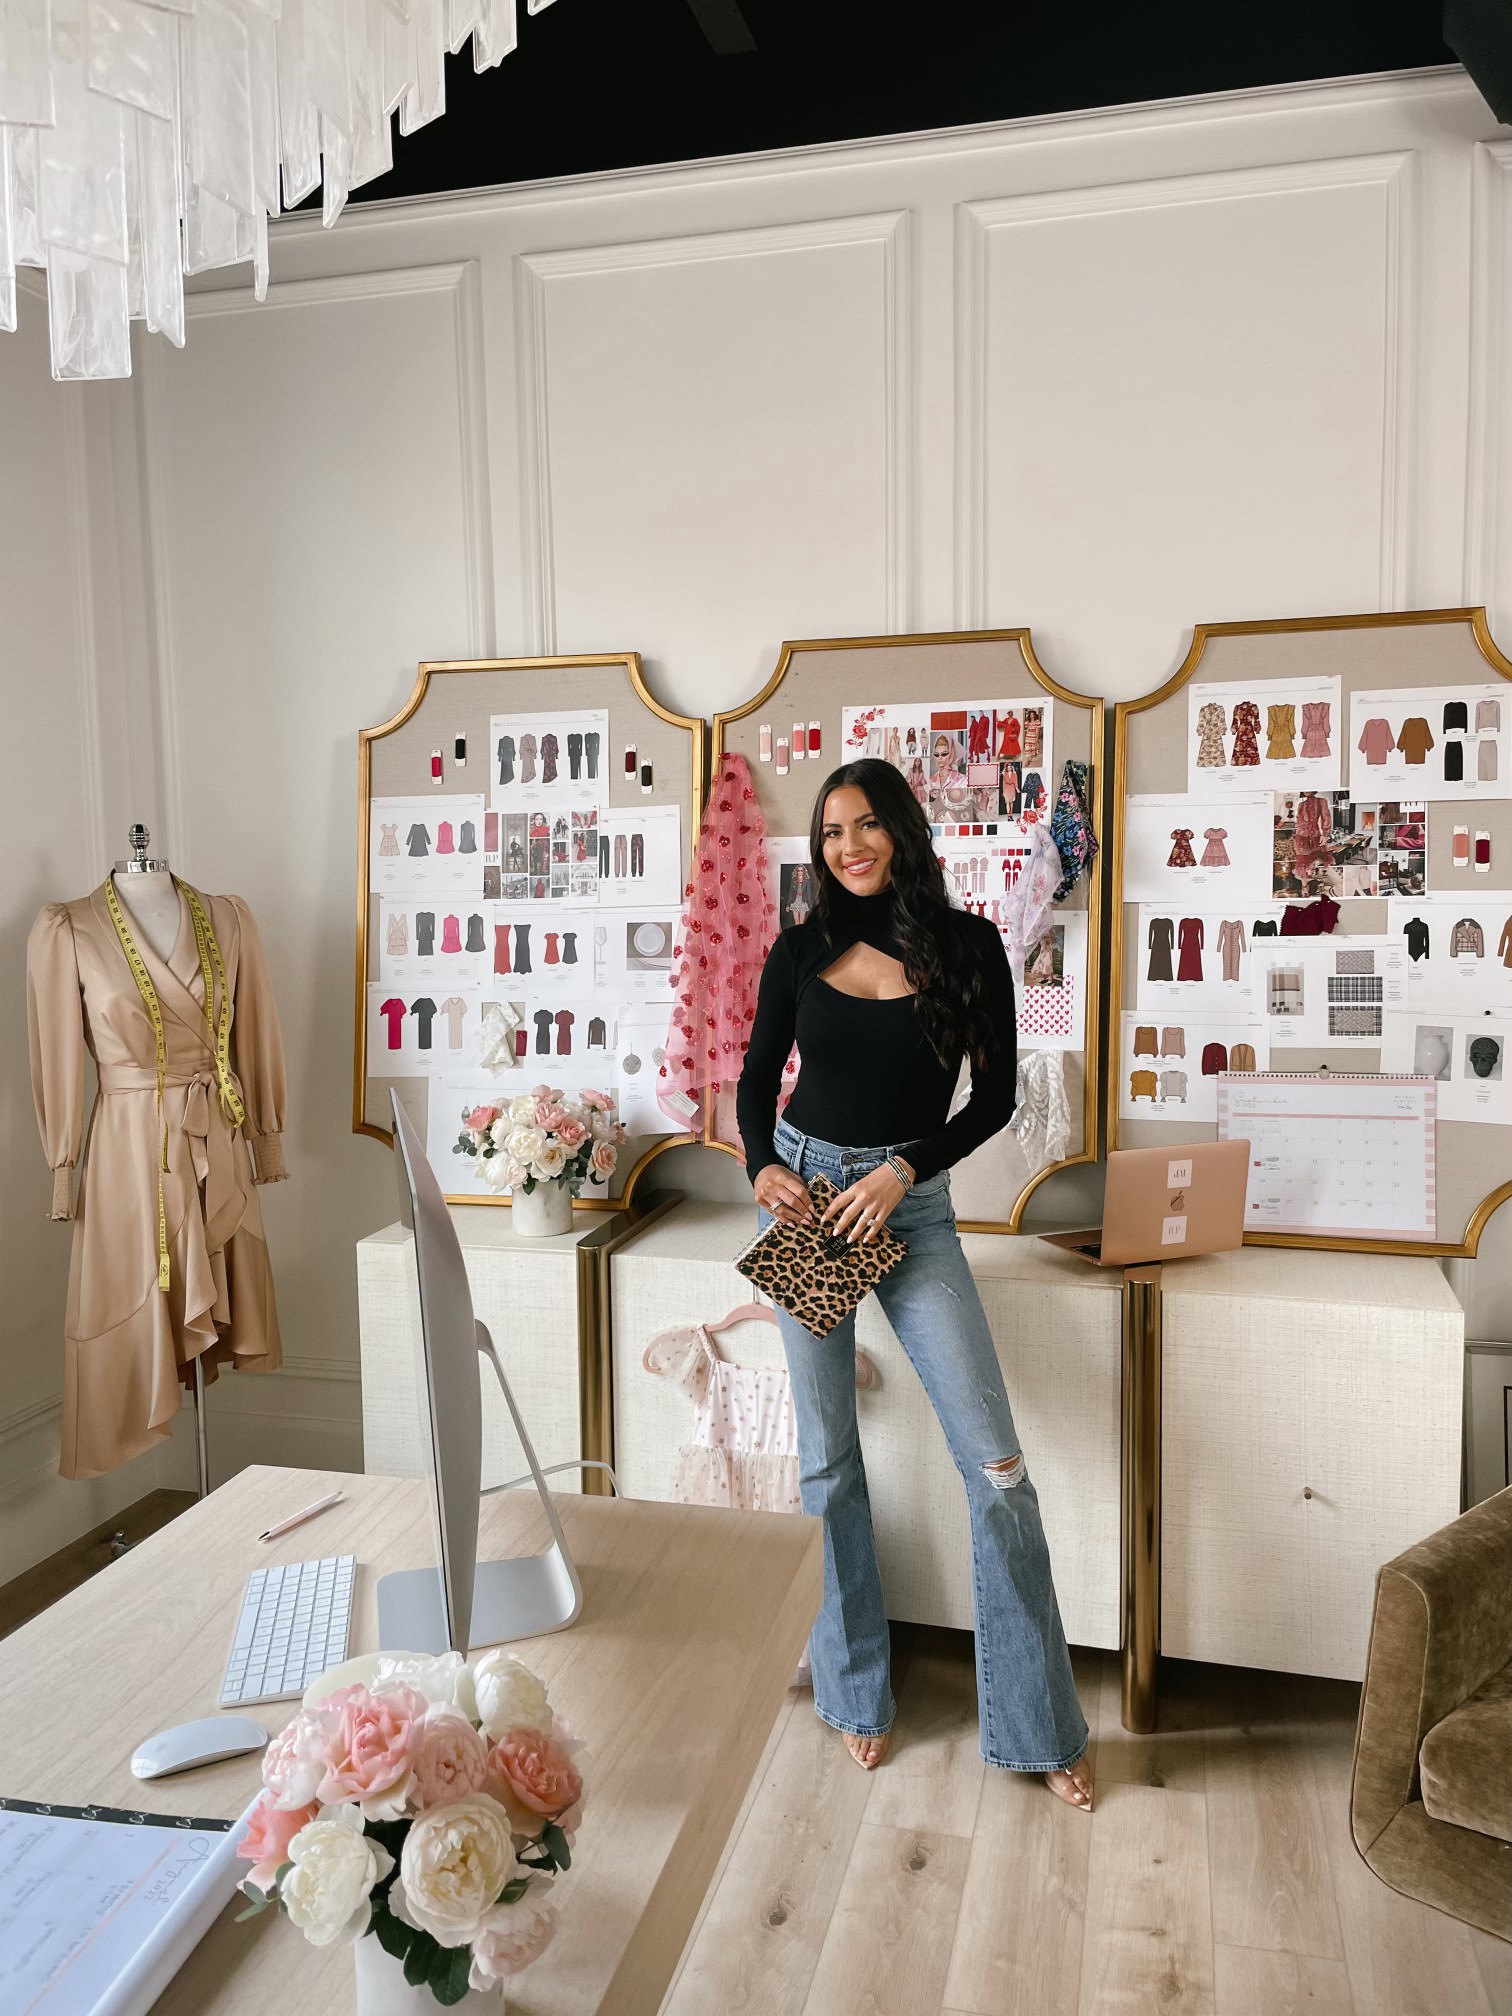 In this edition of the Founder Series, Rachel Parcell shares how she founded a multi-million dollar fashion and lifestyle brand.